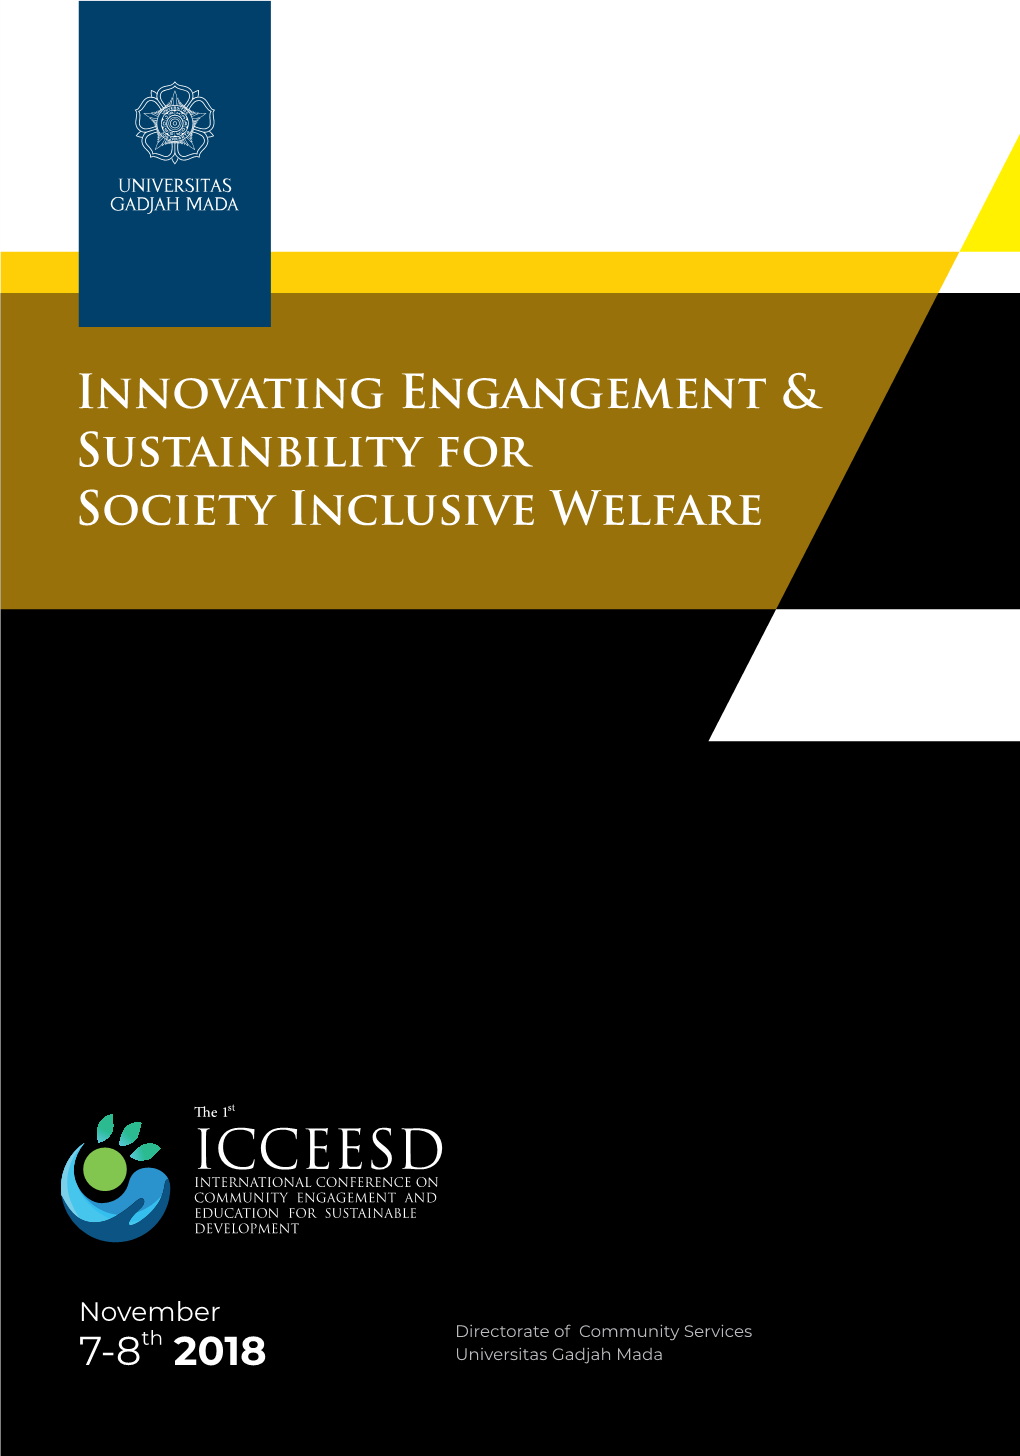 Icceesd International Conference on Community Engagement and Education for Sustainable Development